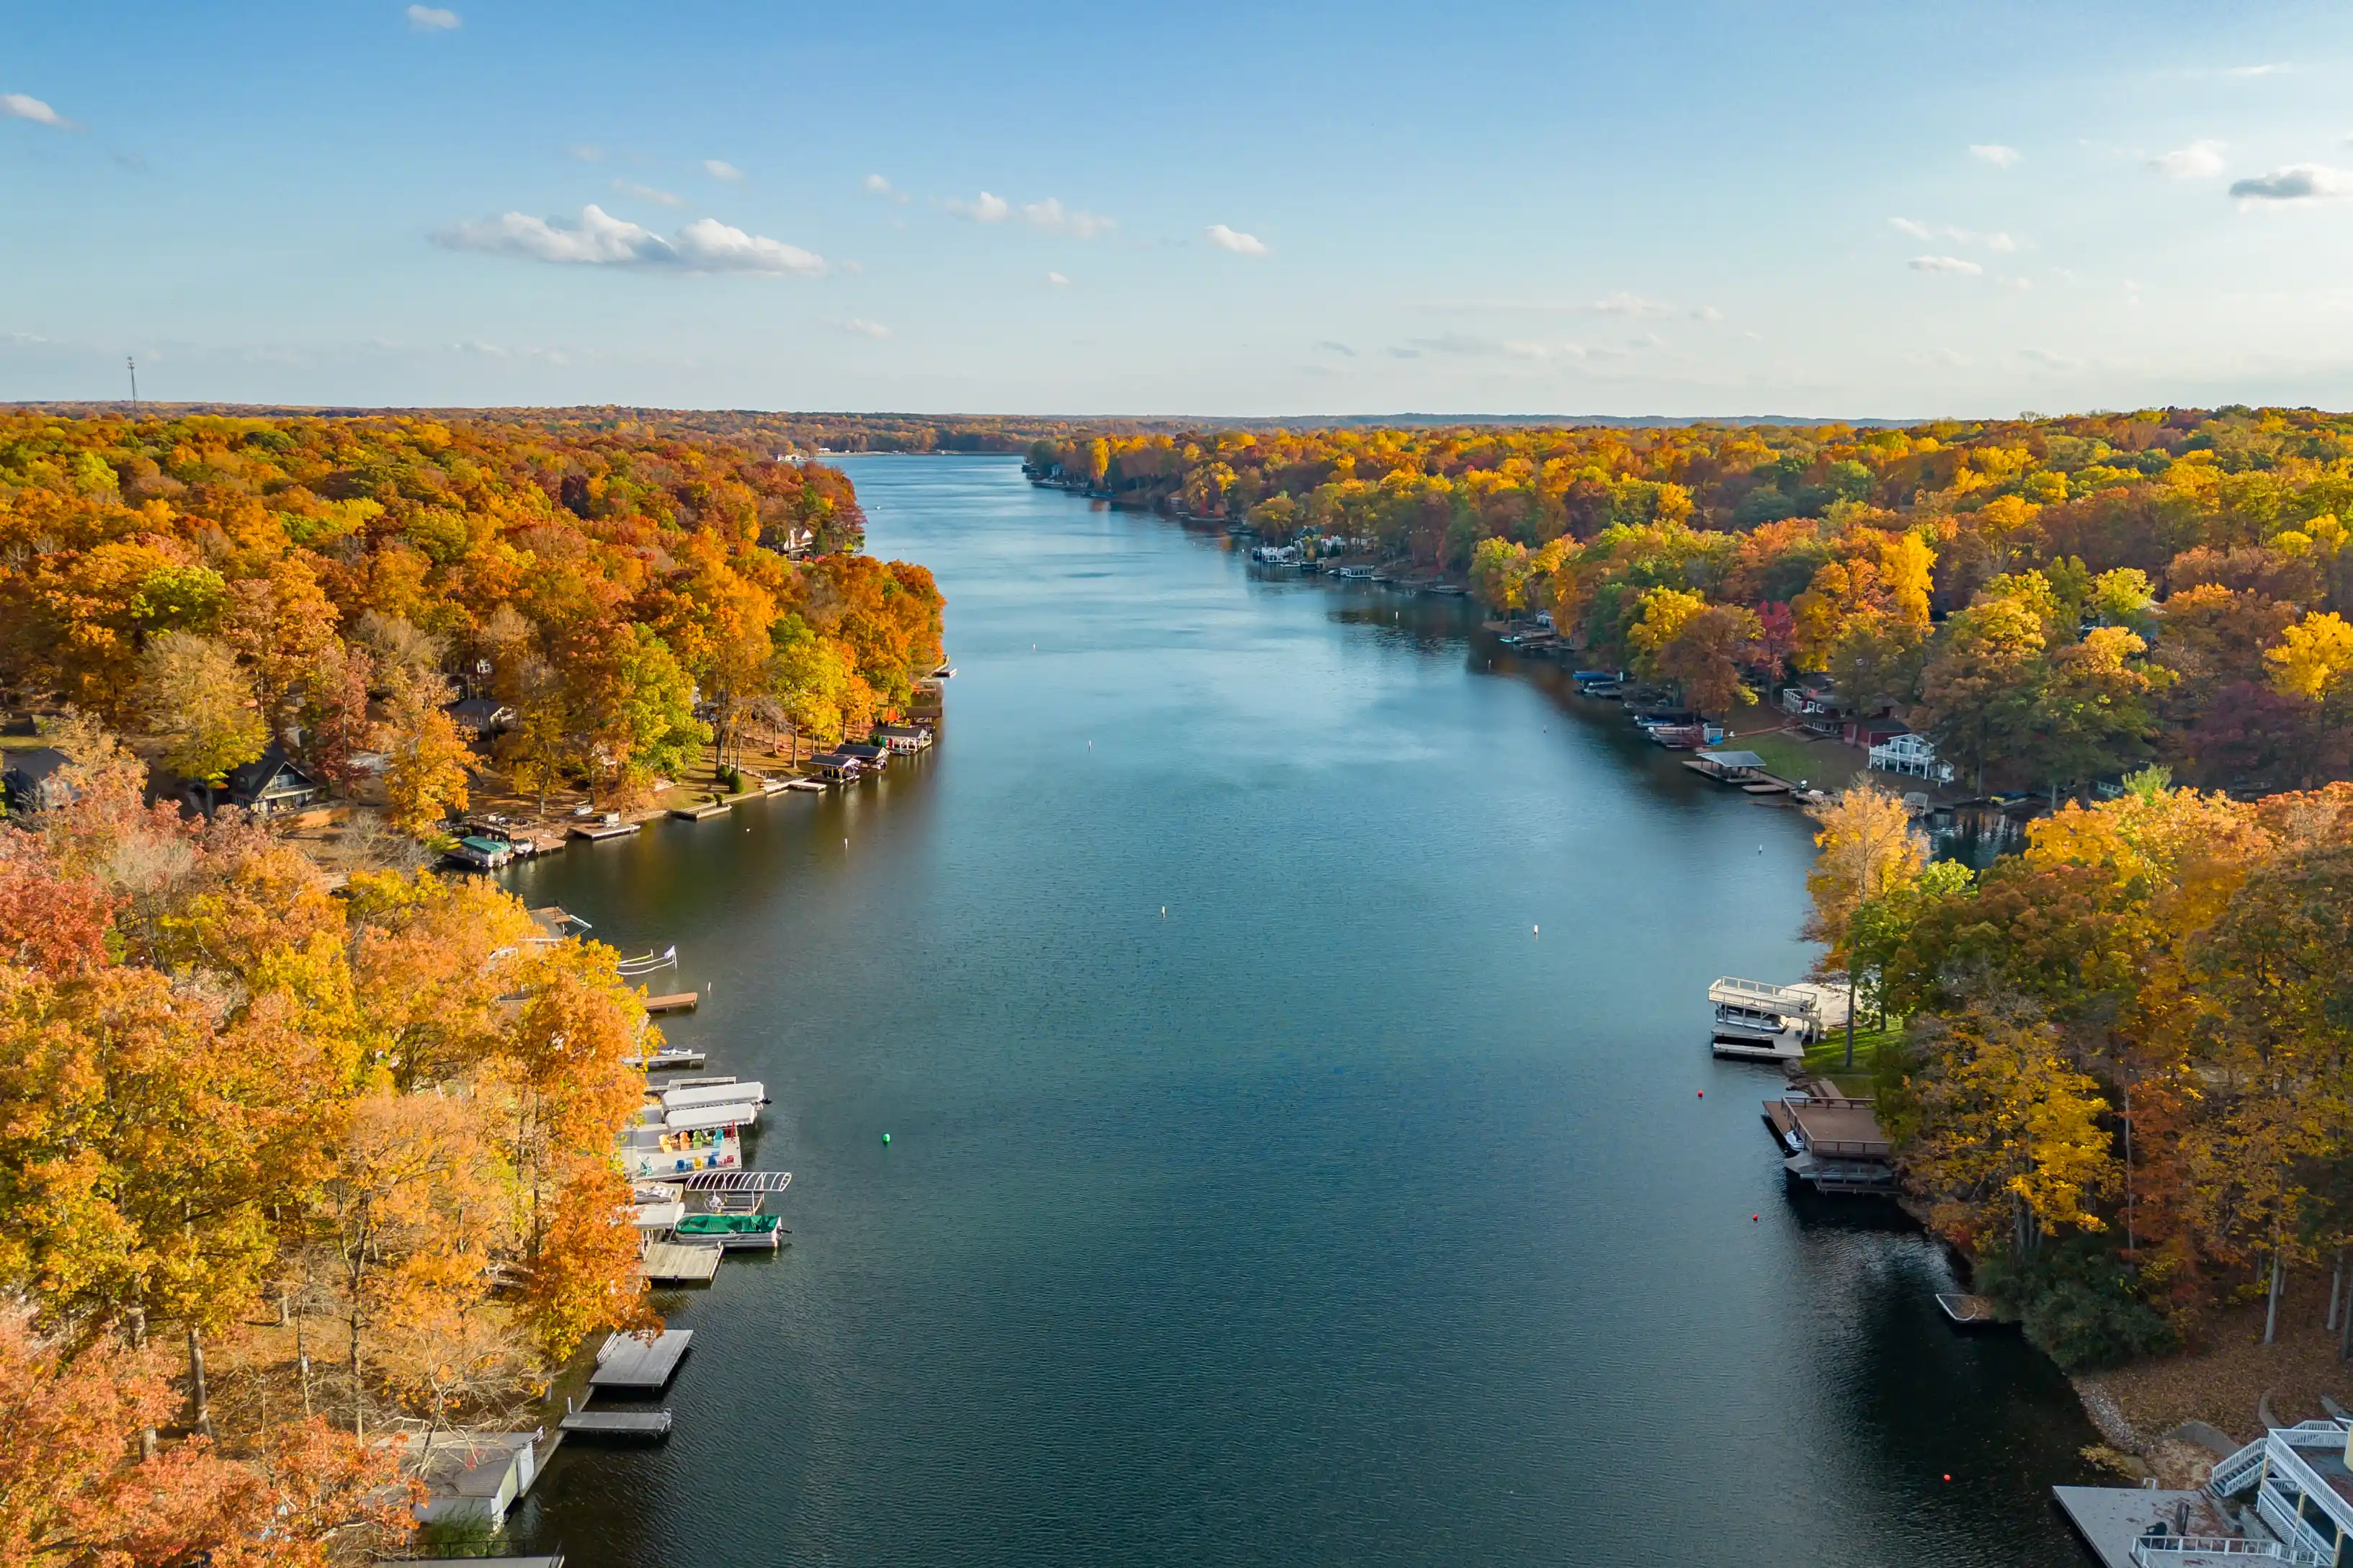 Aerial view of a river surrounded by trees with autumn foliage, with docks and boats along the banks.